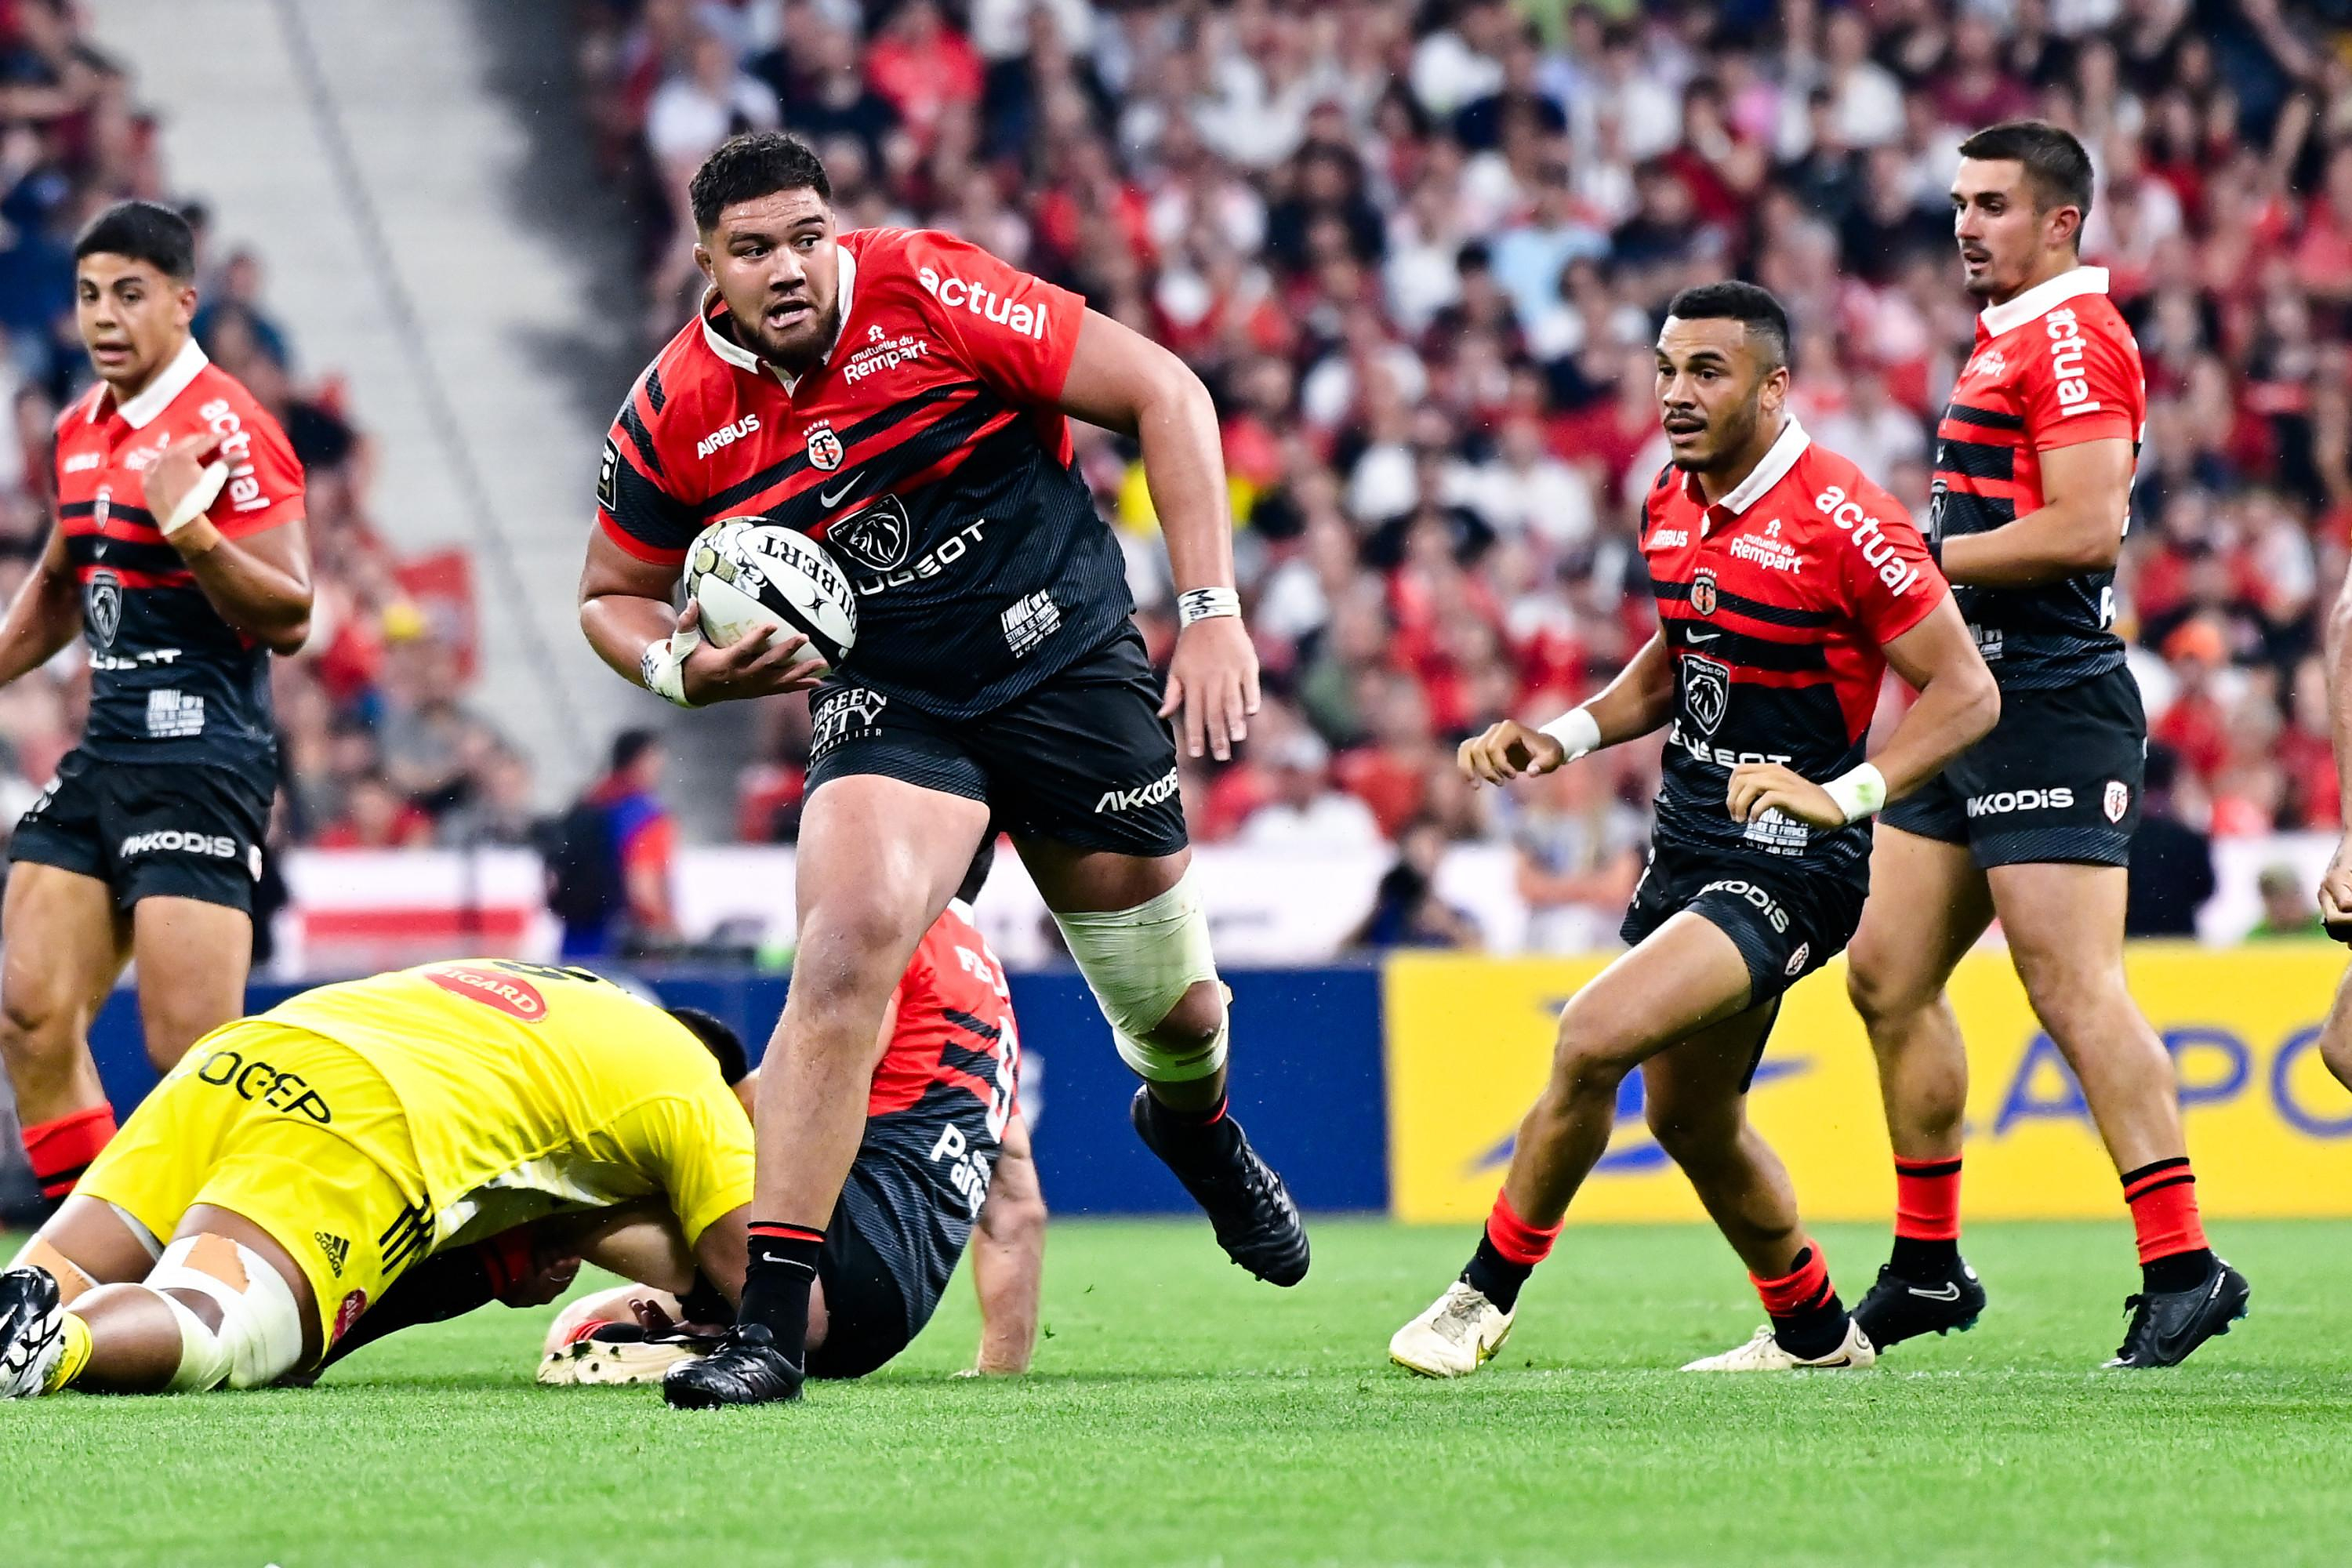 Top 14: Meafou and Flament (finally) back with Toulouse for the derby against Castres